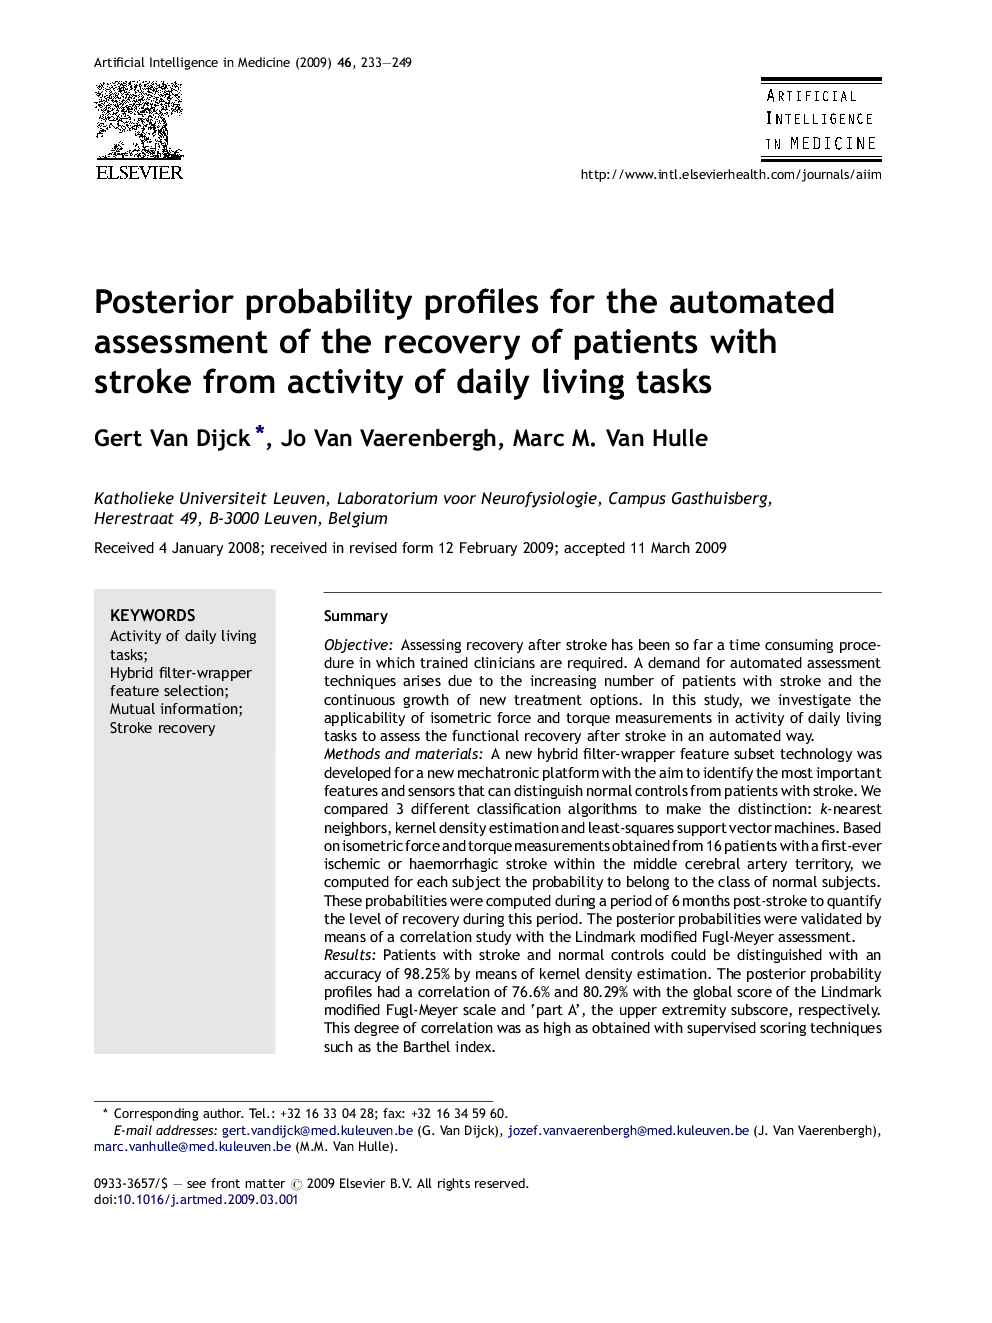 Posterior probability profiles for the automated assessment of the recovery of patients with stroke from activity of daily living tasks